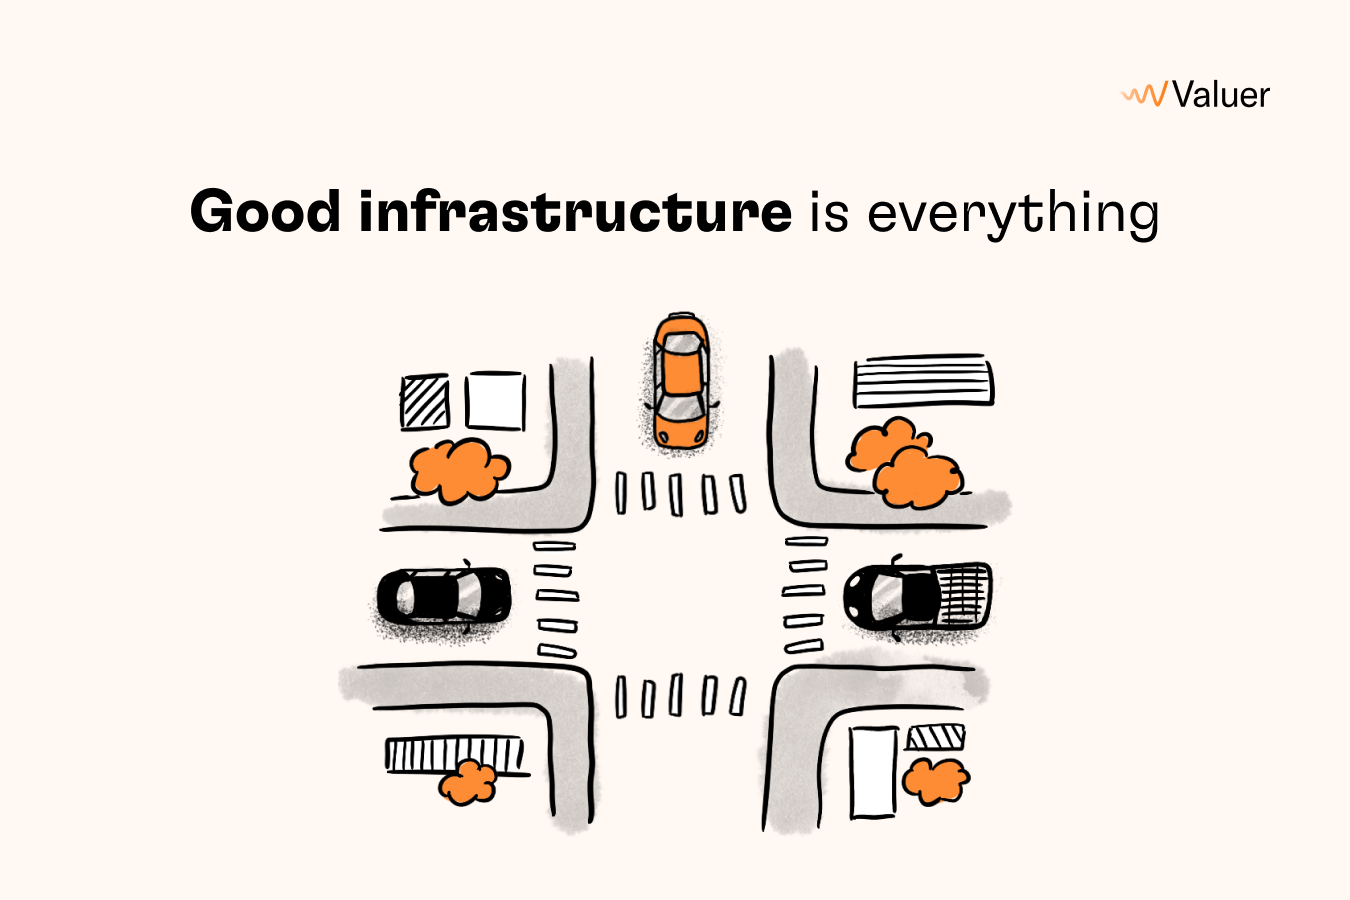 Good infrastructure is everything